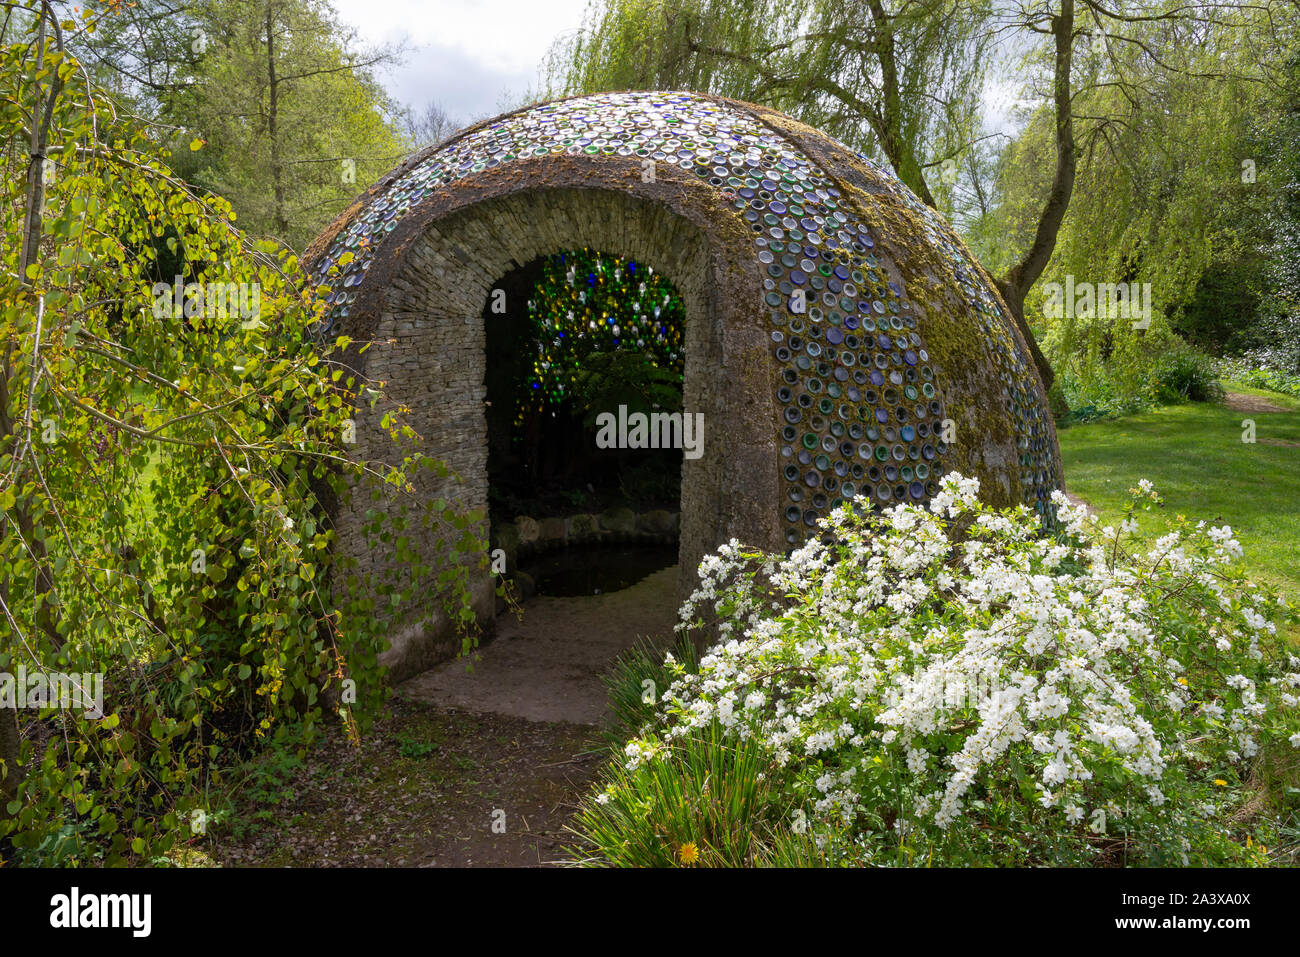 Westonbury Mill water gardens, Herefordshire, England. Unusual domed sculpture made from coloured glass bottles. Stock Photo